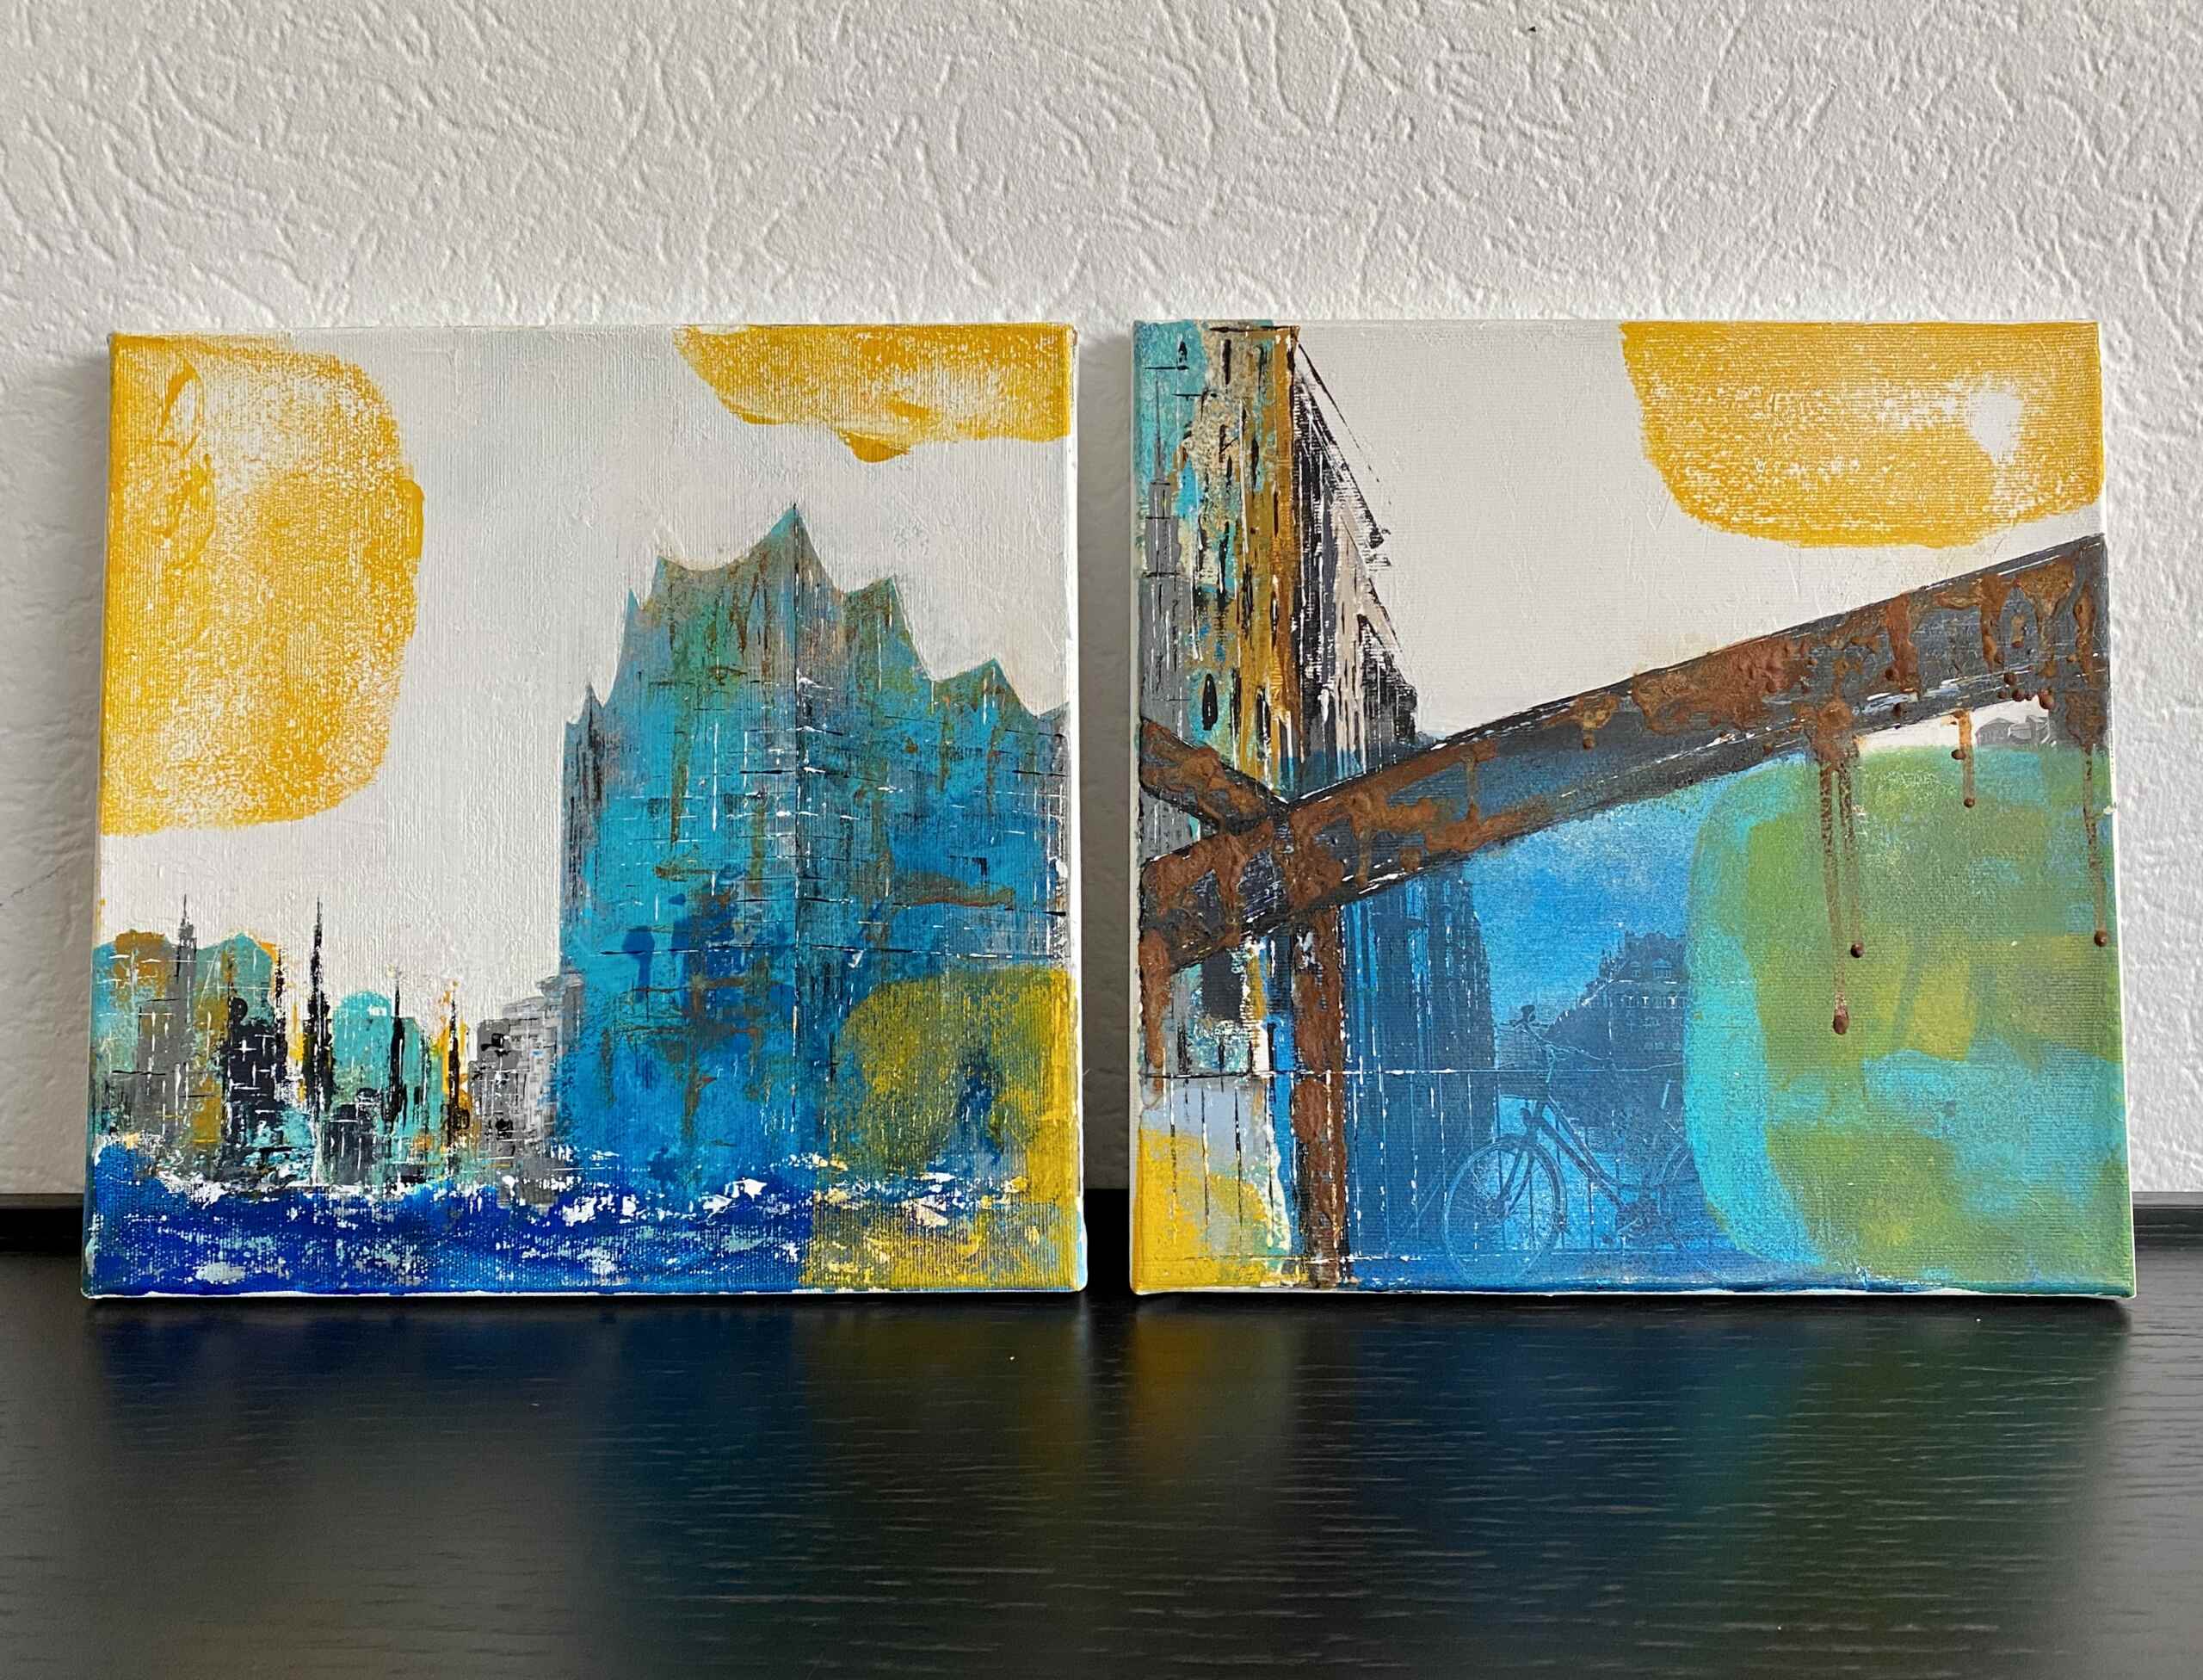 Two artworks from the "Tribute to Hamburg" series by Nina Groth